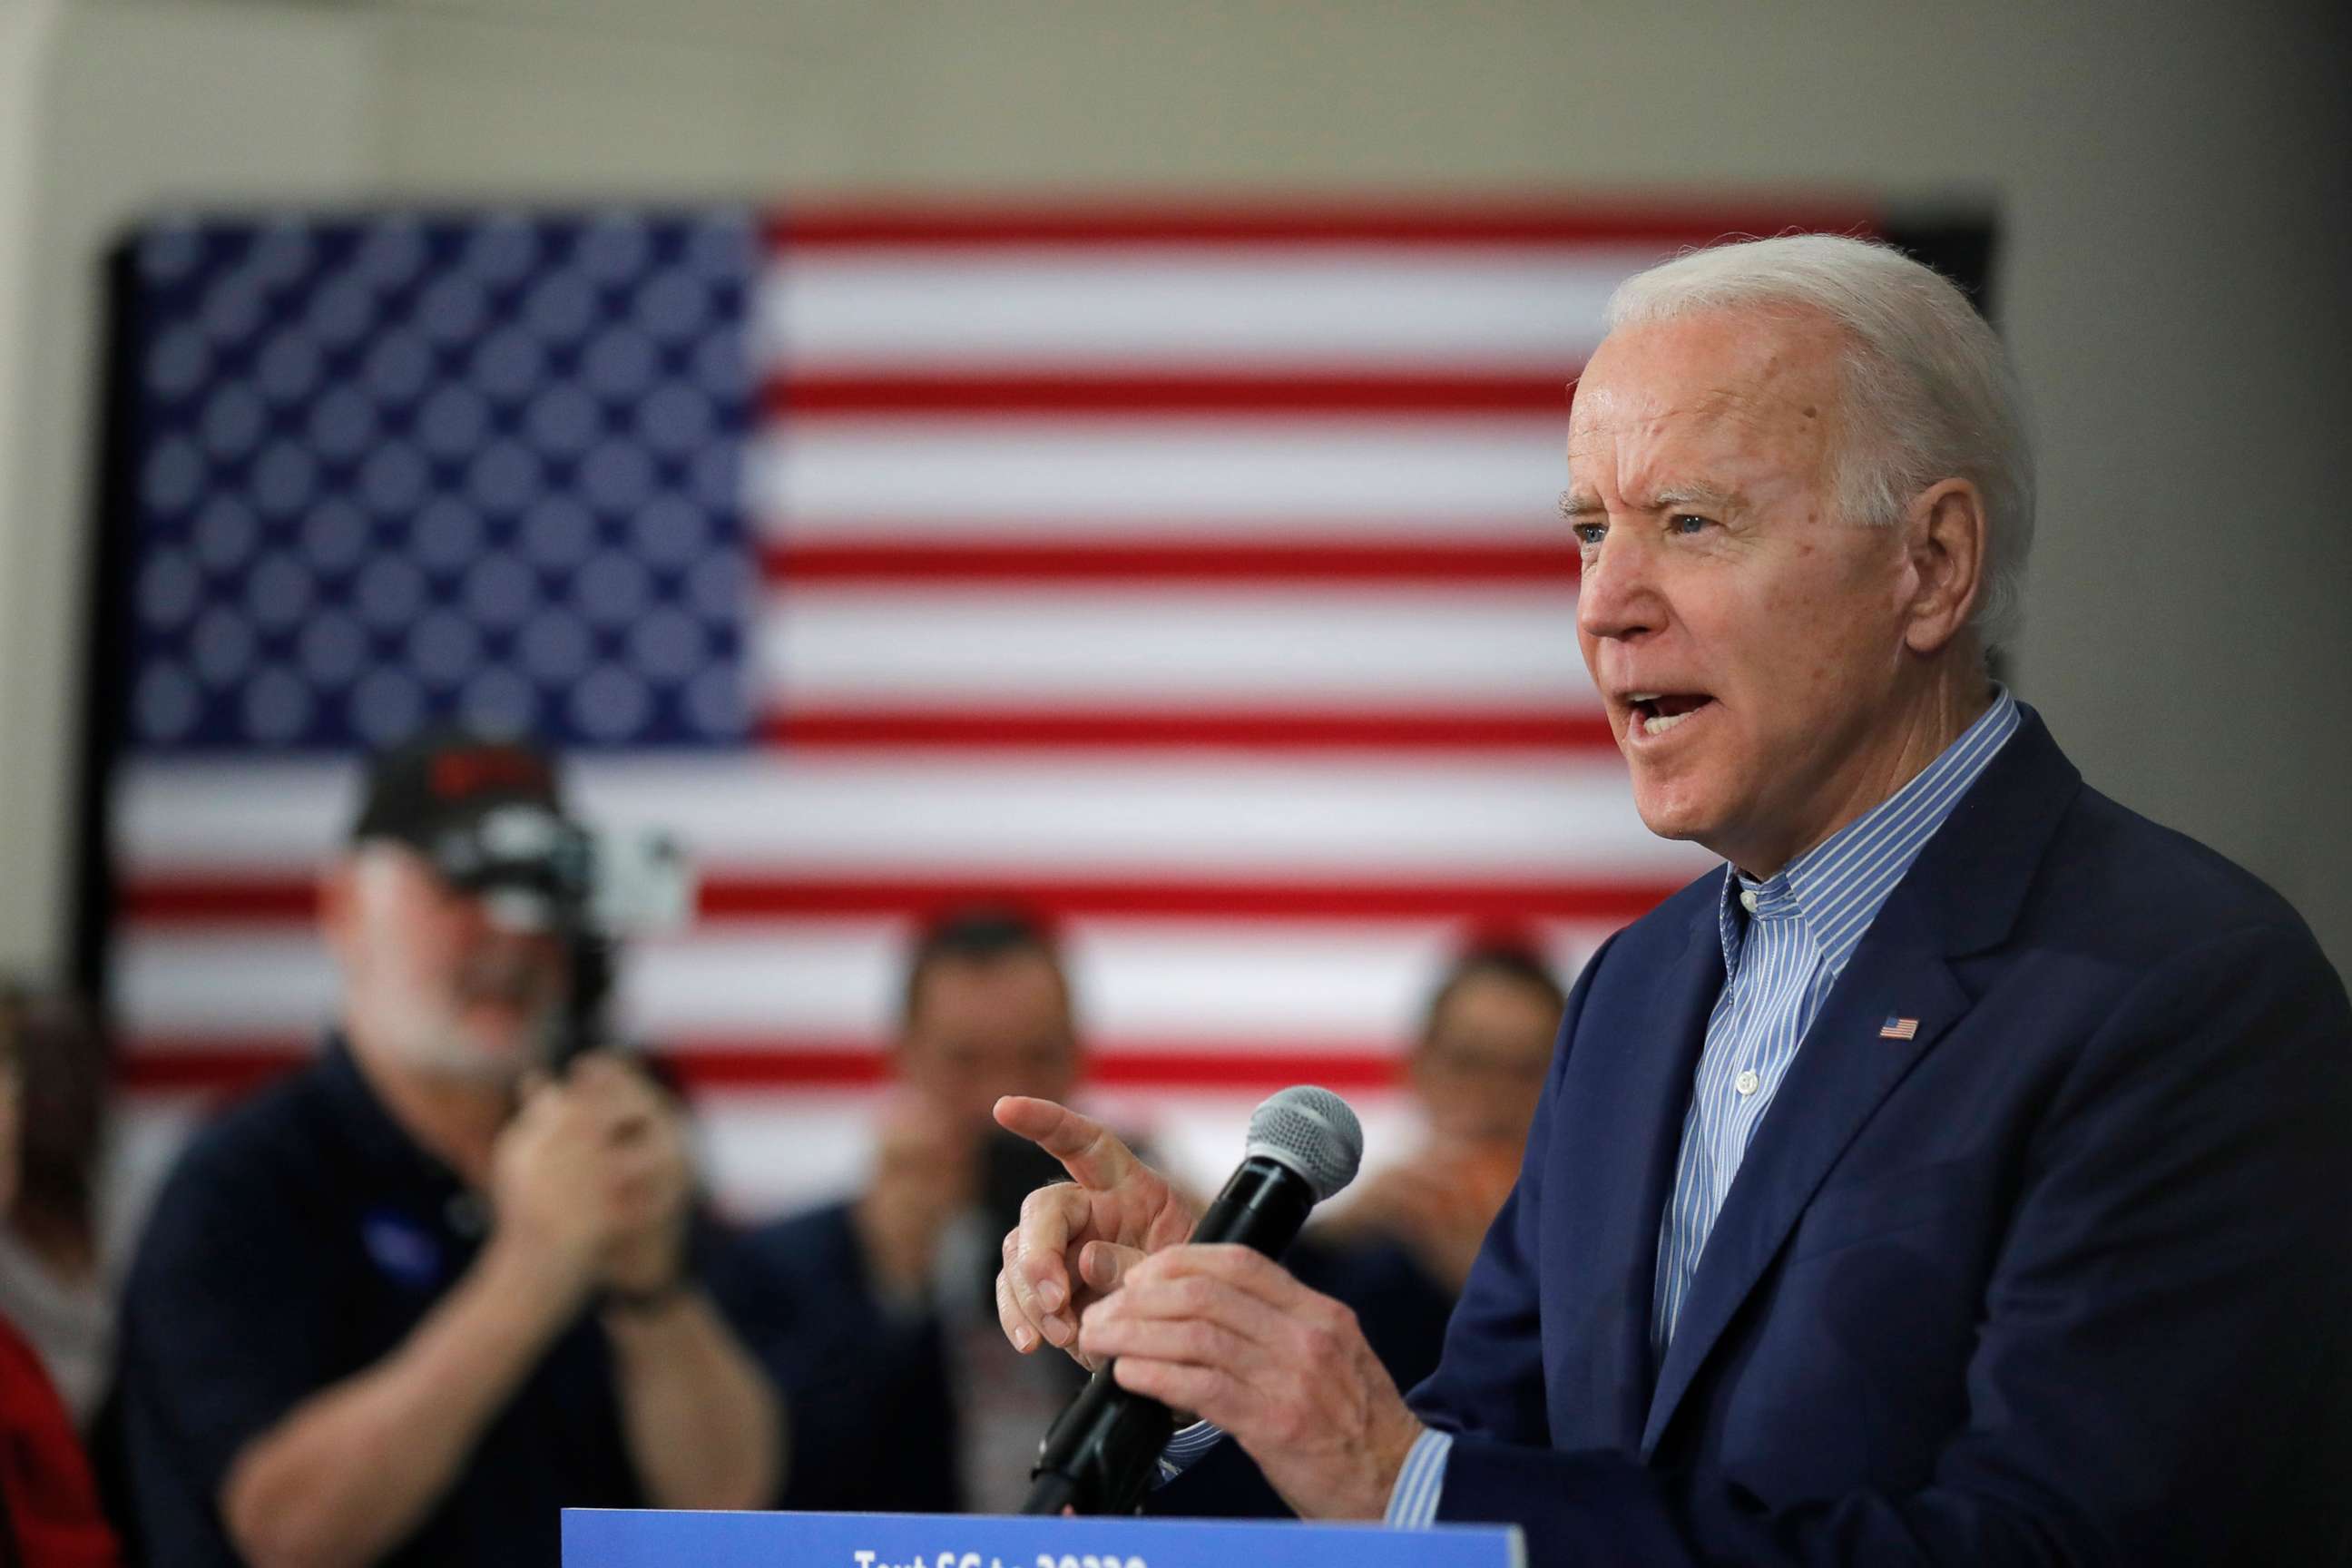 PHOTO: Democratic presidential candidate former Vice President Joe Biden speaks at a campaign event in Sumter, SC., Feb. 28, 2020.